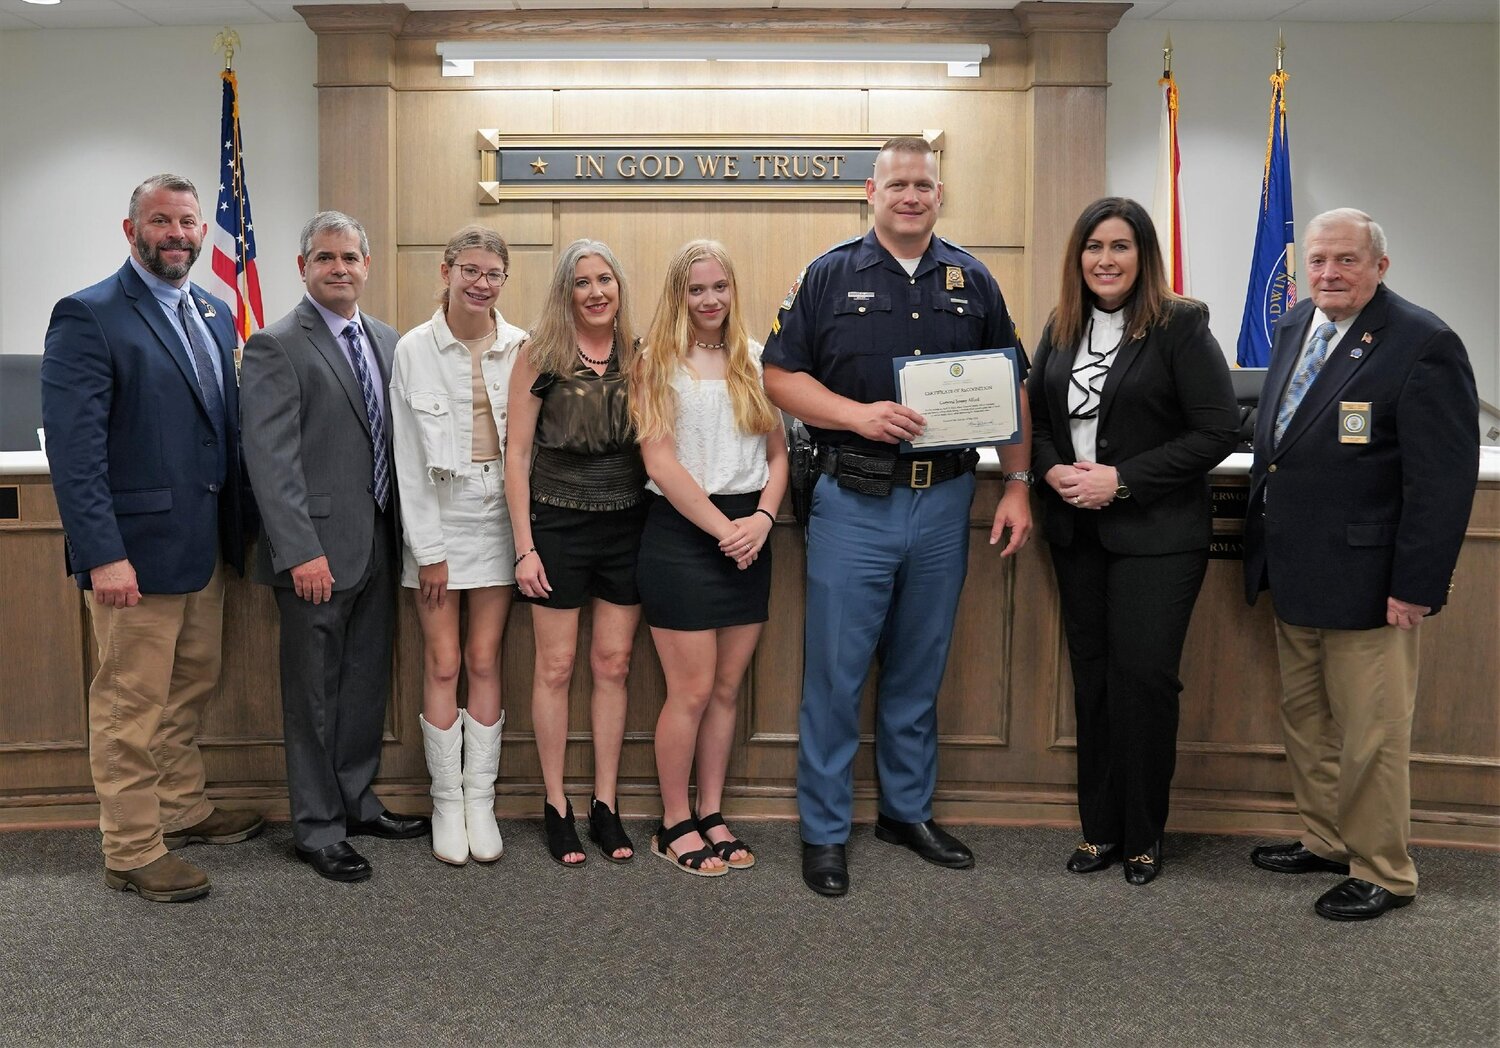 Cpl. Jeremy Alford, a state trooper and Baldwin County resident, was honored by Baldwin County Commission for his efforts during an incident in which he was shot in the line of duty.